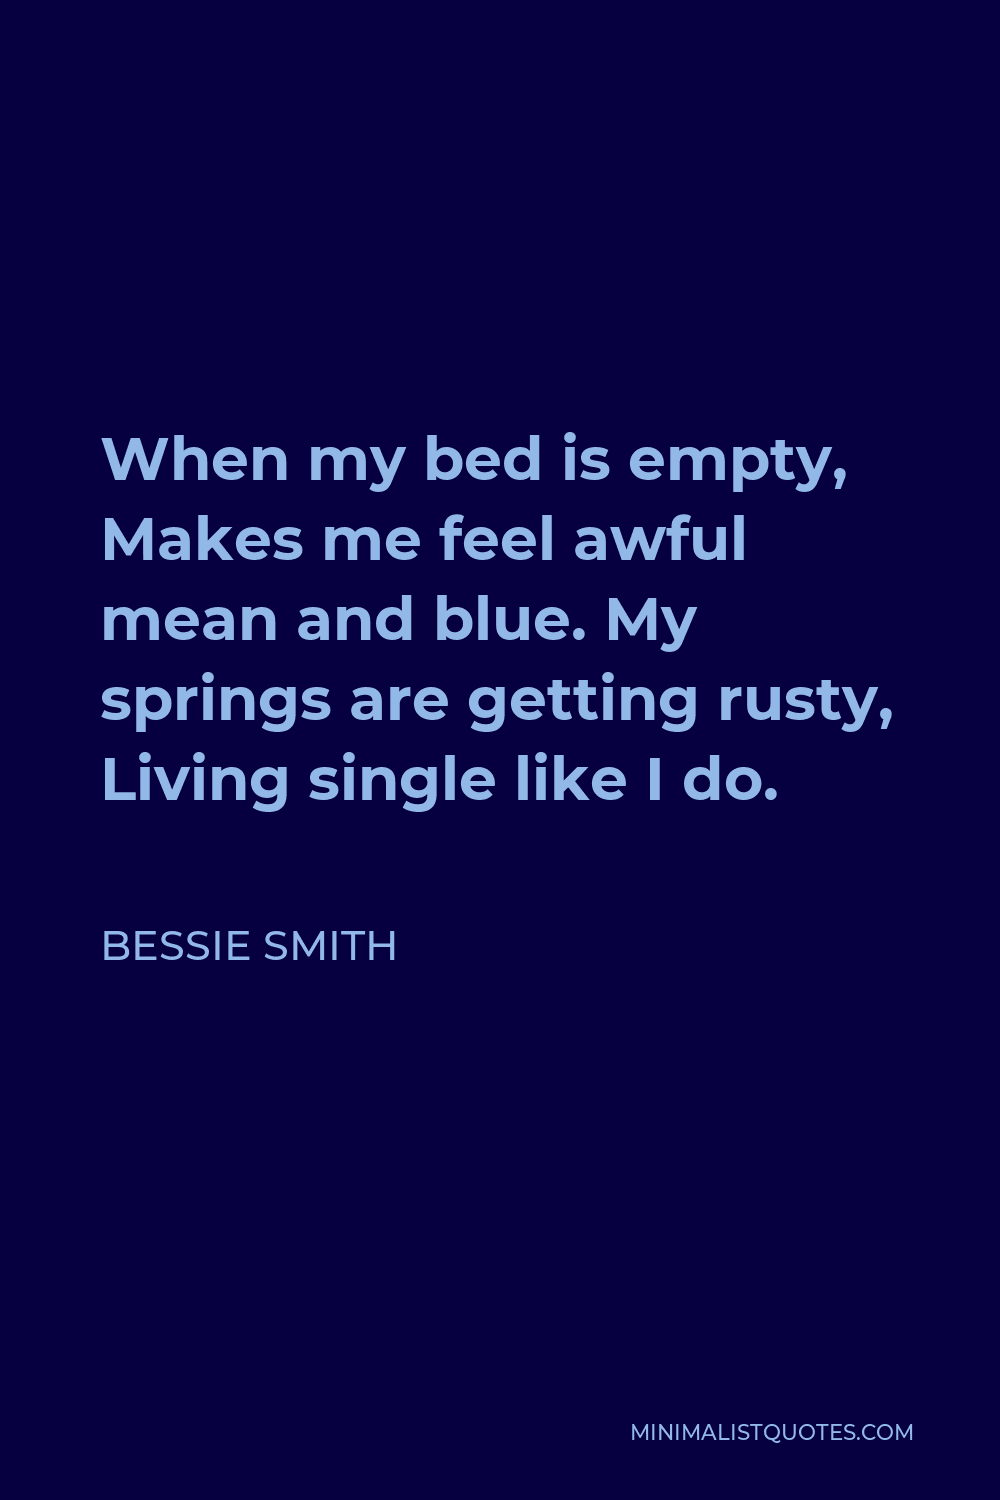 Bessie Smith Quote - When my bed is empty, Makes me feel awful mean and blue. My springs are getting rusty, Living single like I do.